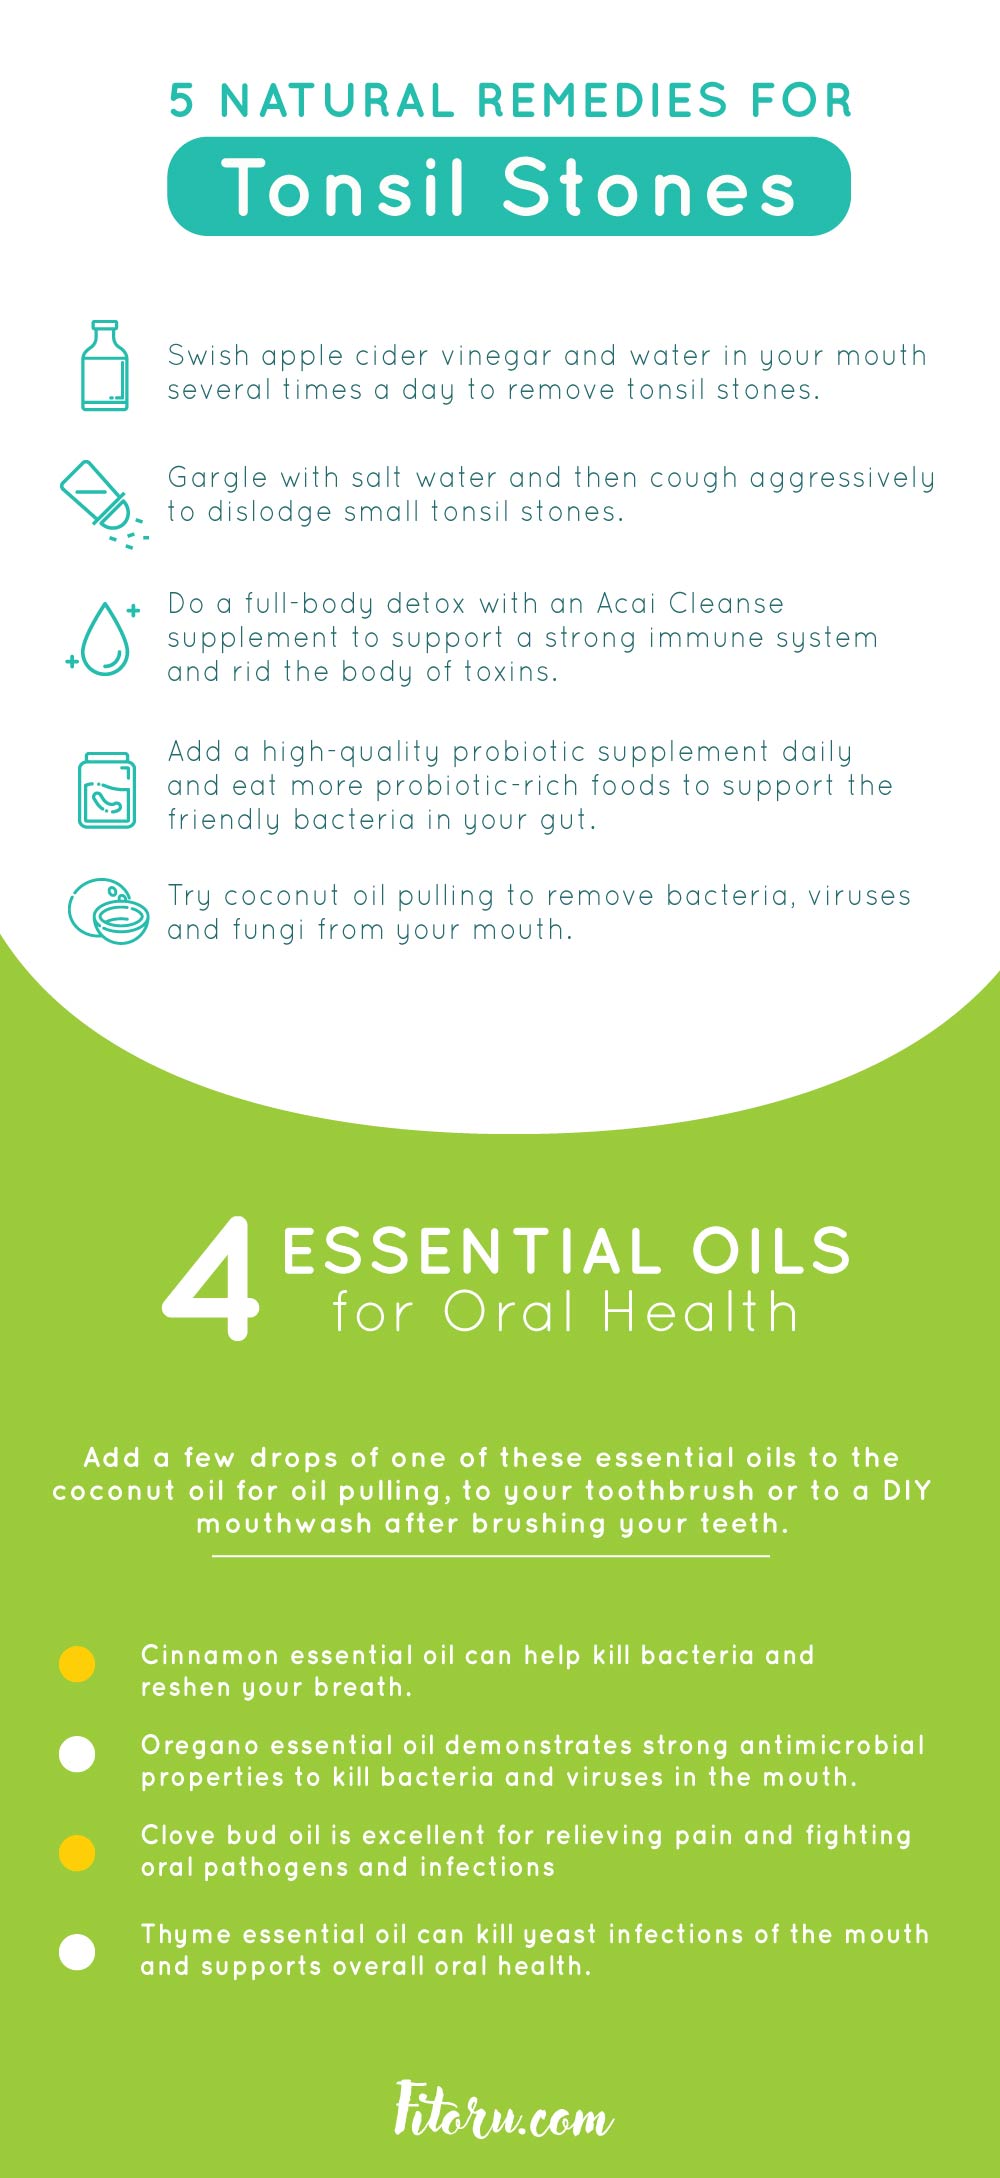 5 Natural Remedies for Tonsil Stones and 4 Essential Oils for Oral Health.